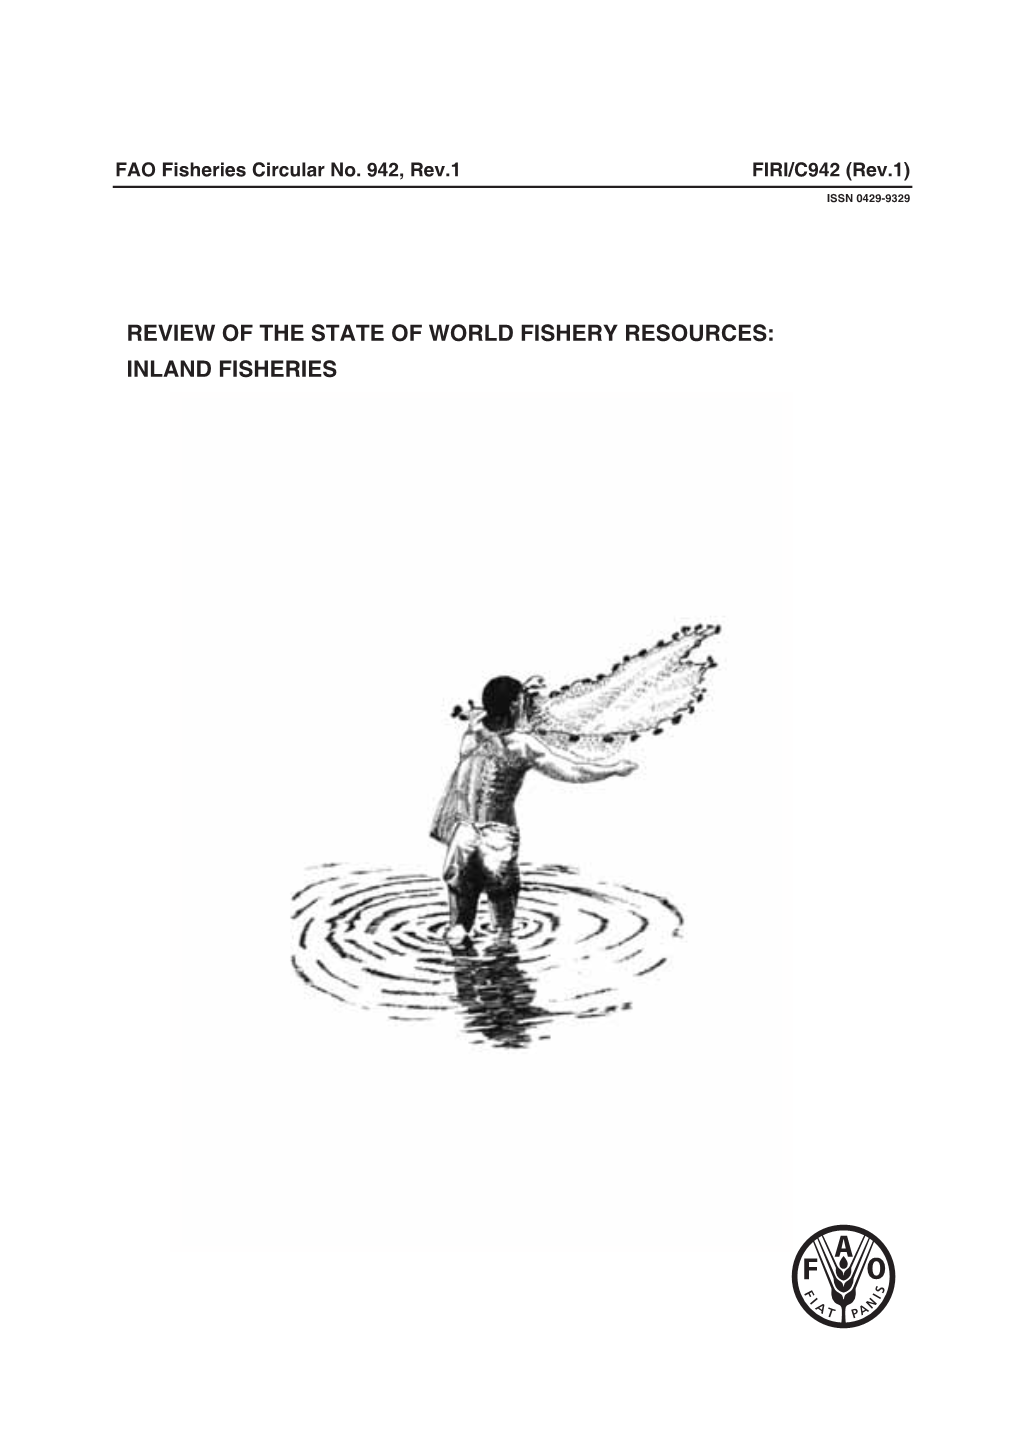 Review of the State of World Fishery Resources: Inland Fisheries